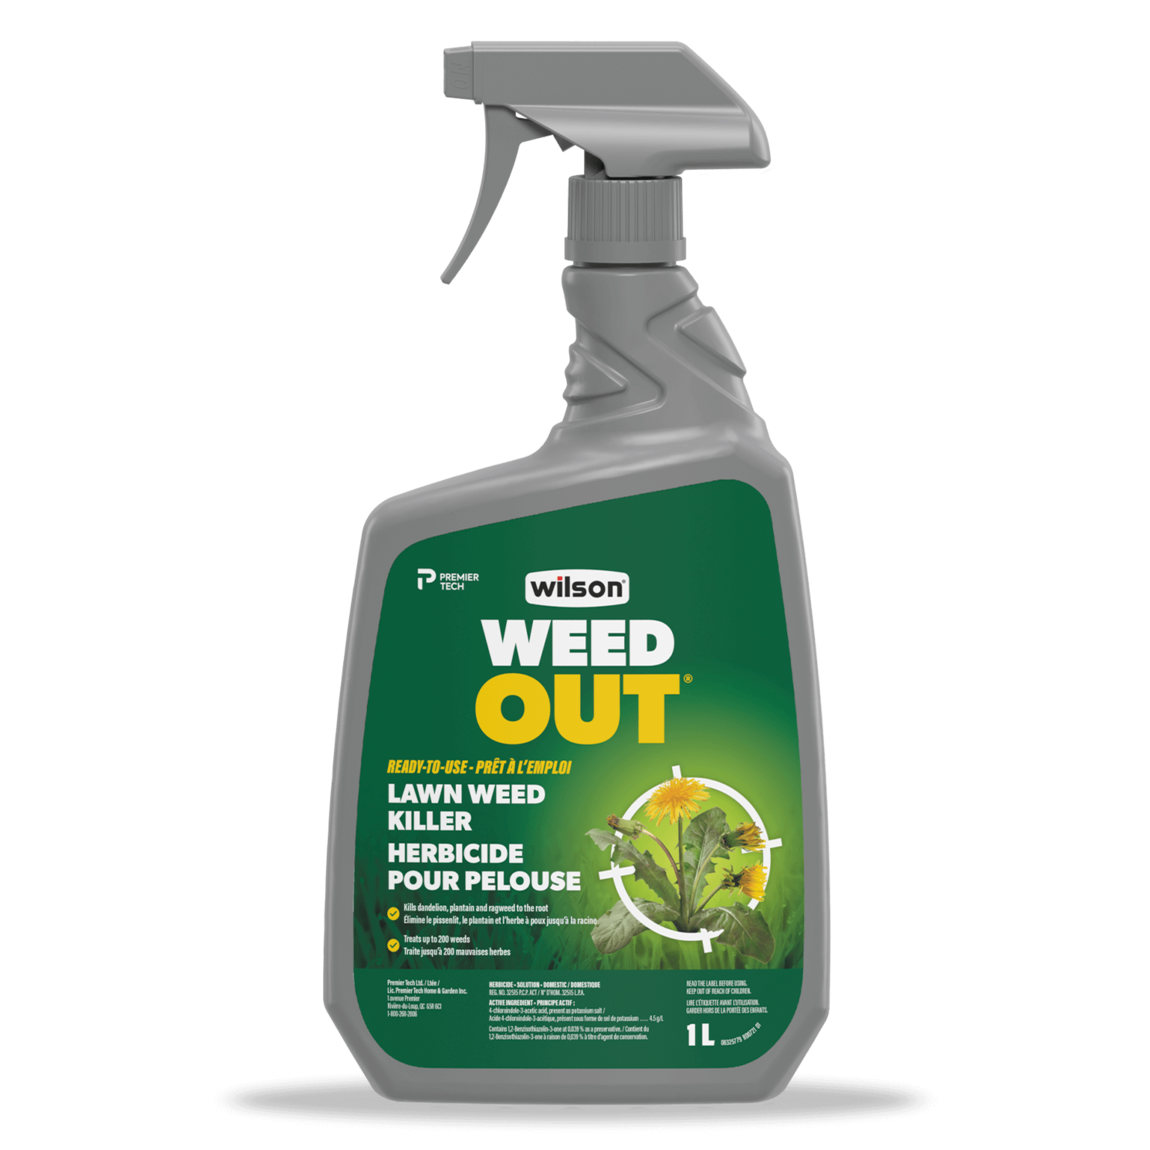 https://www.wilsoncontrol.com/sites/ptgc_wilson/files/styles/swiper_gallery_image/public/2022-01/wilson-weed-out-lawn-weed-killer-1l.png?itok=EHIr6Vpi